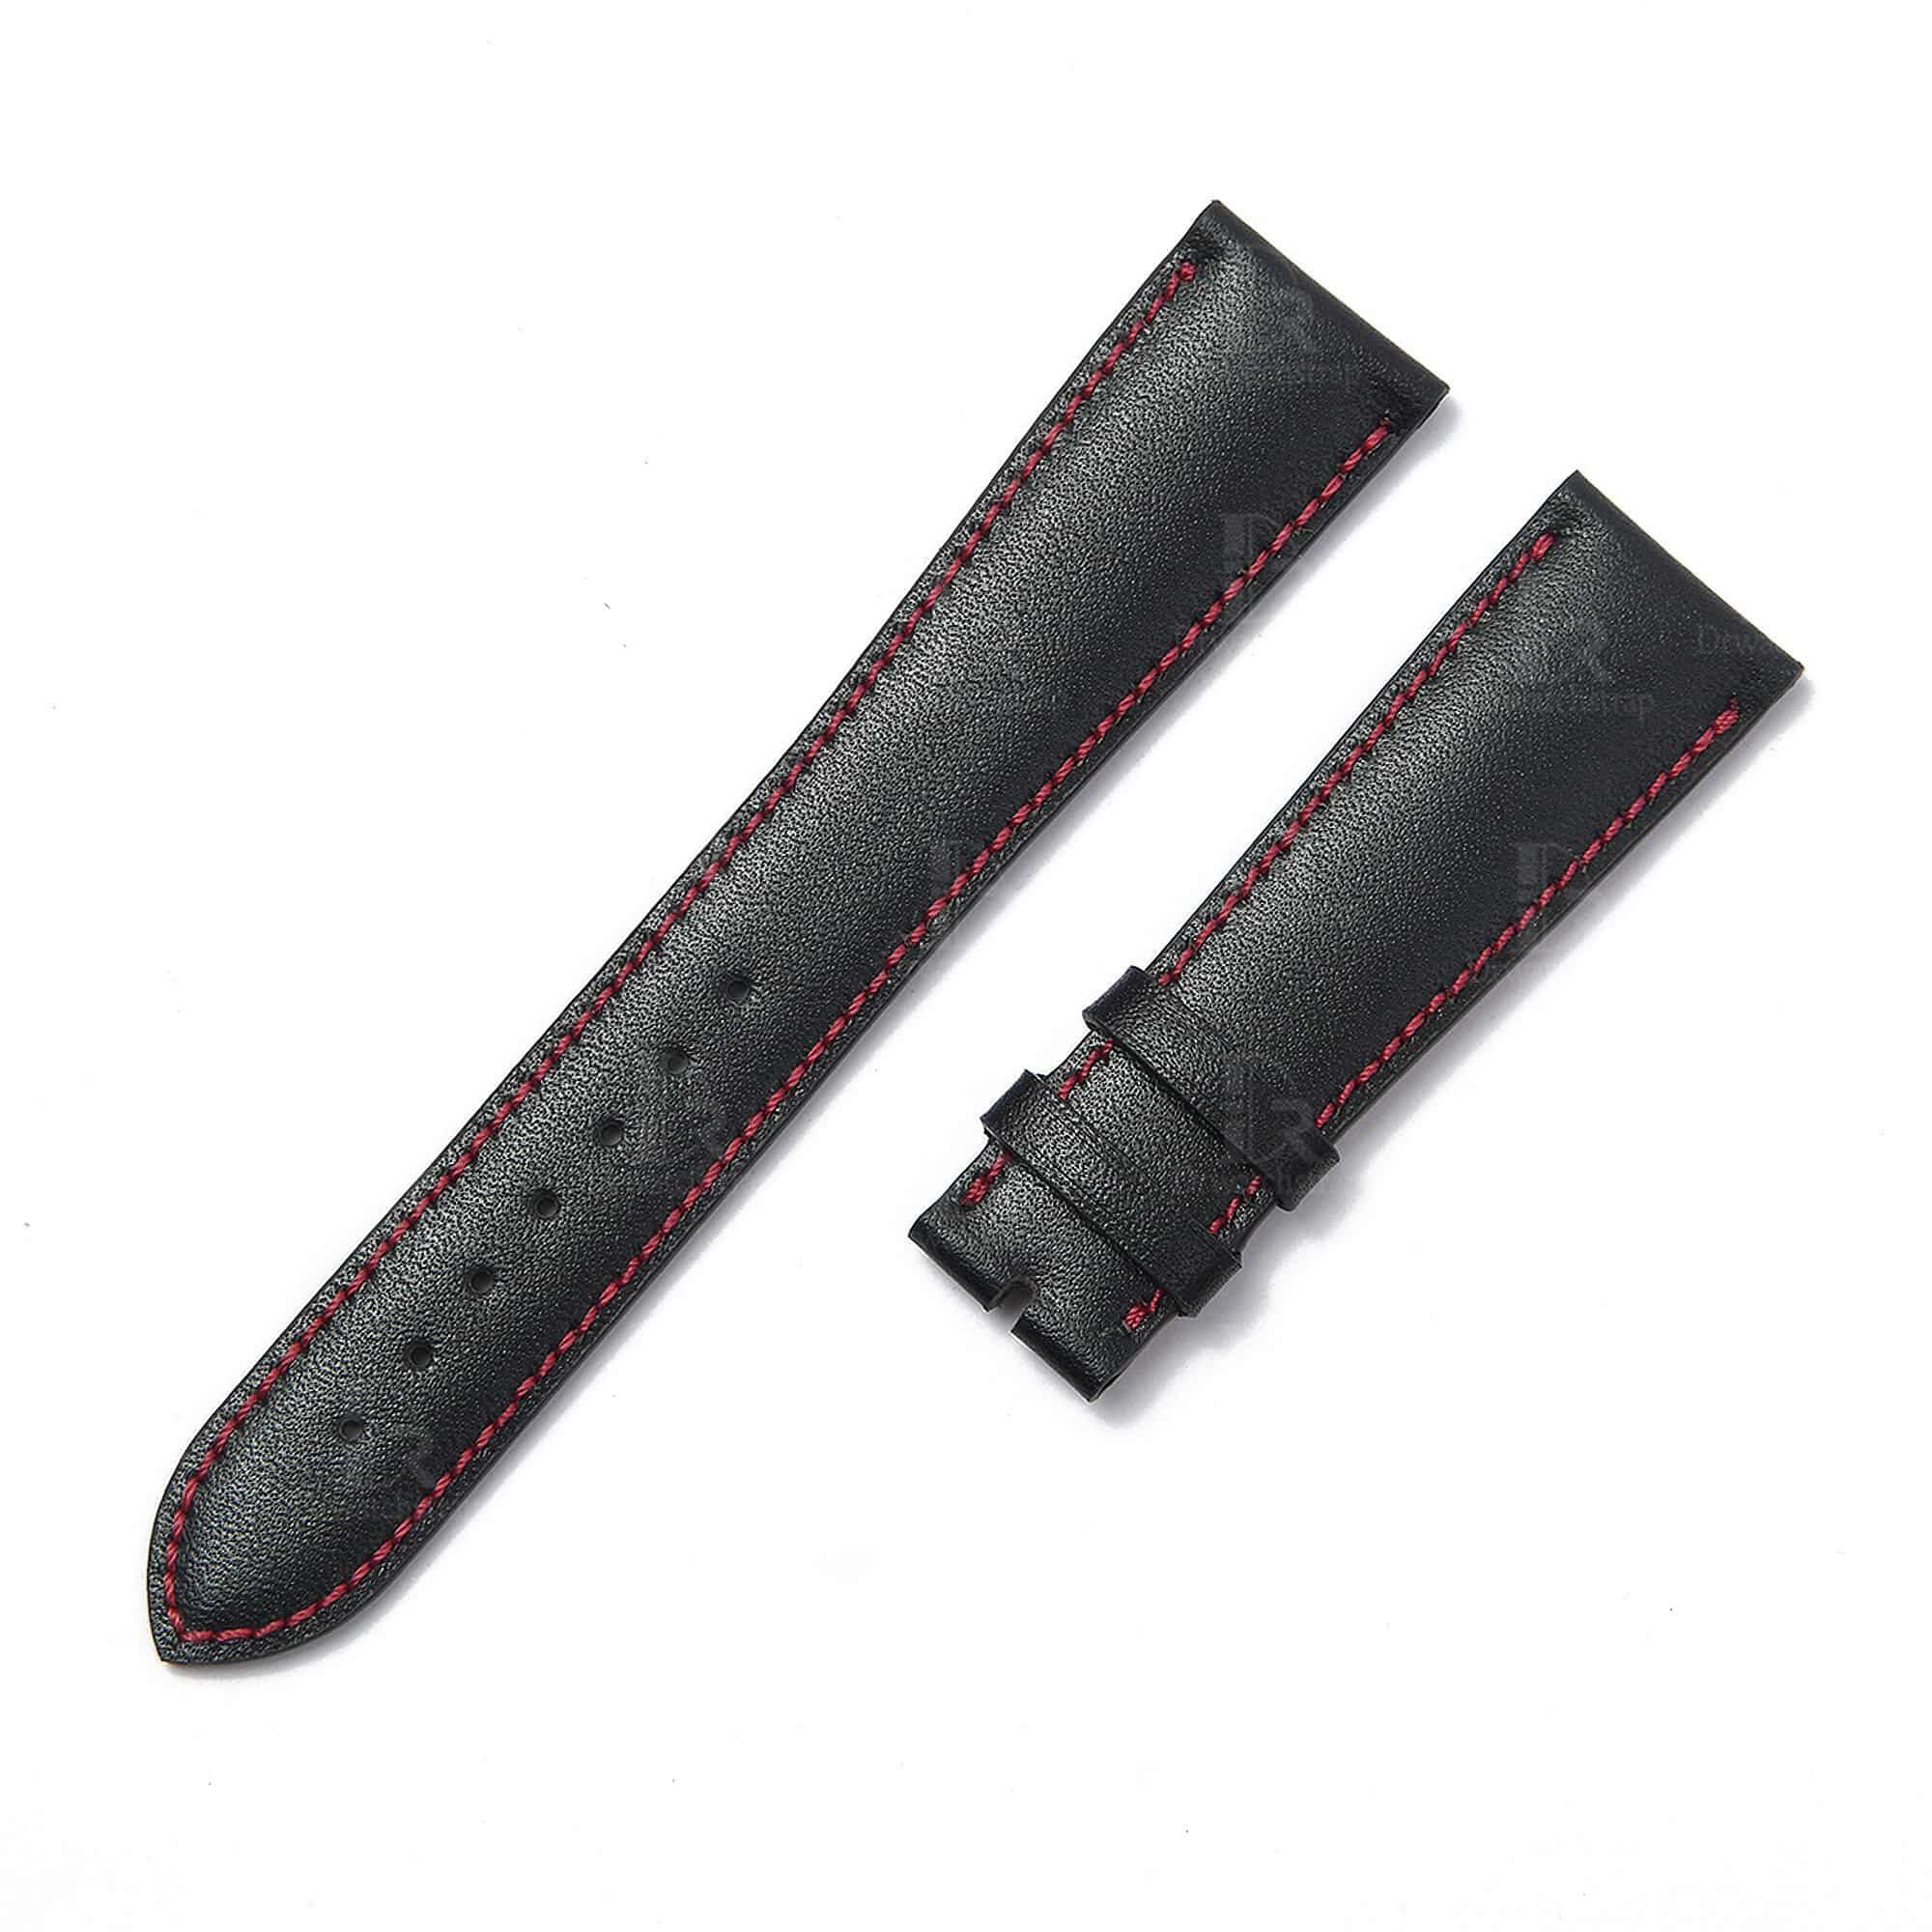 Best quality handmade OEM premium black calfskin replacement Tudor leather strap and watch band with red linning for Black Bay 58 41 GMT Heritage luxury watches 20mm 22mm 24mm online at a low price - Shop the premium watchs traps online